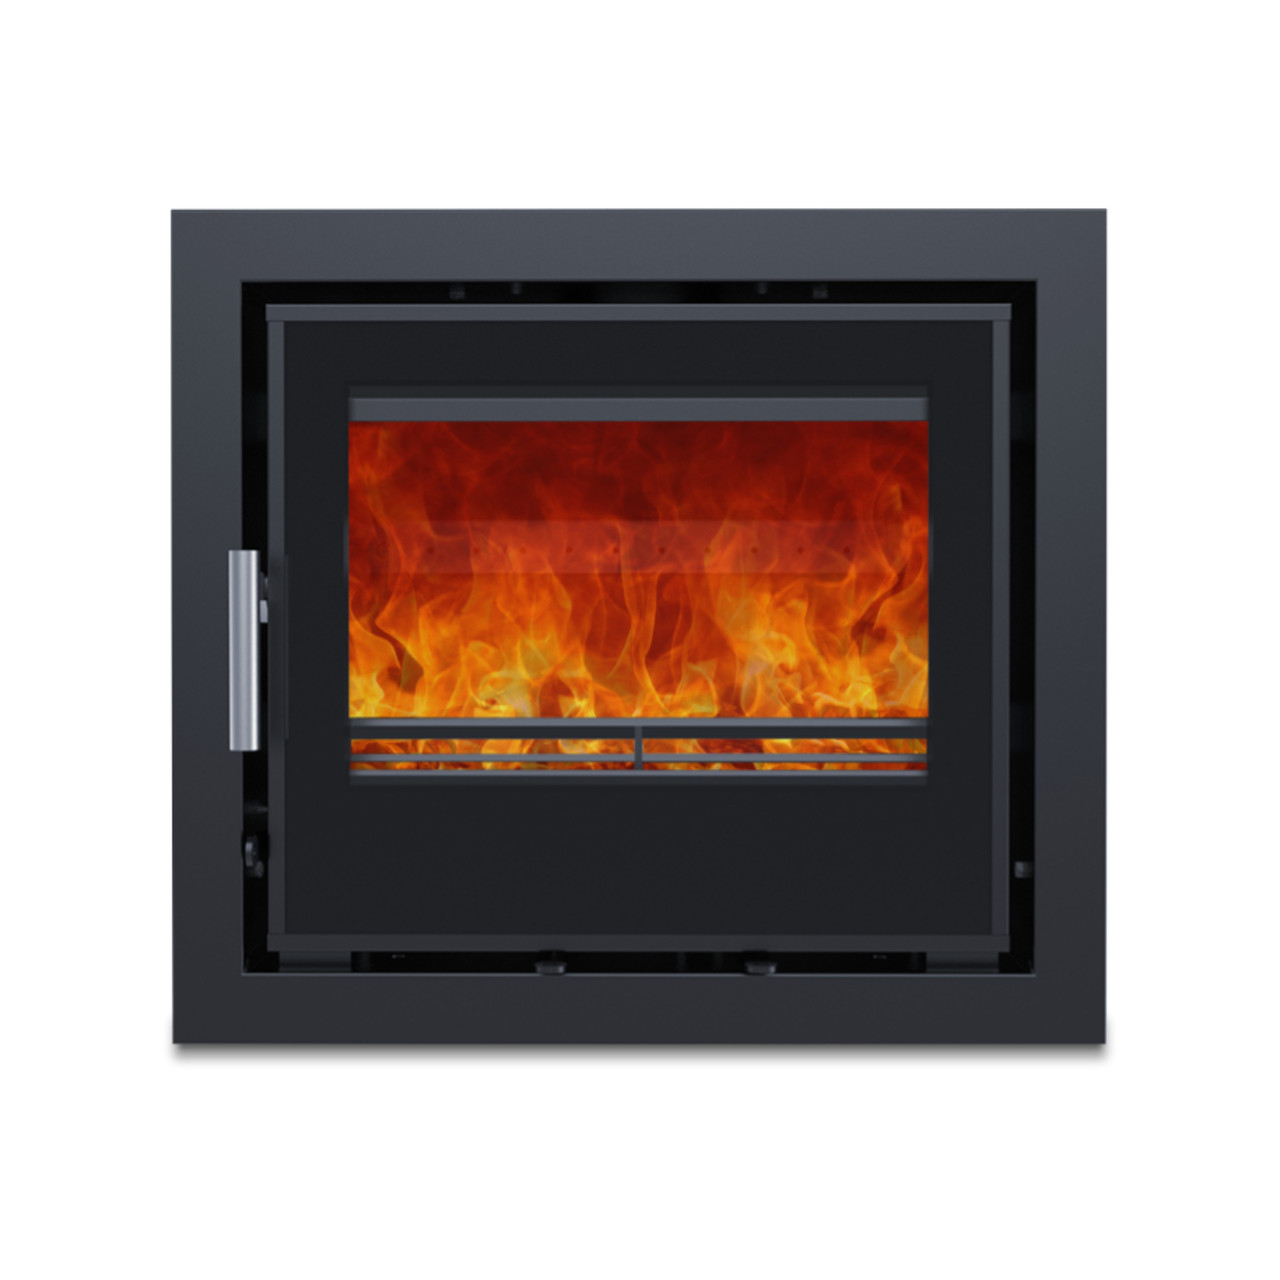 Woodford Lovell C550 Multifuel stove